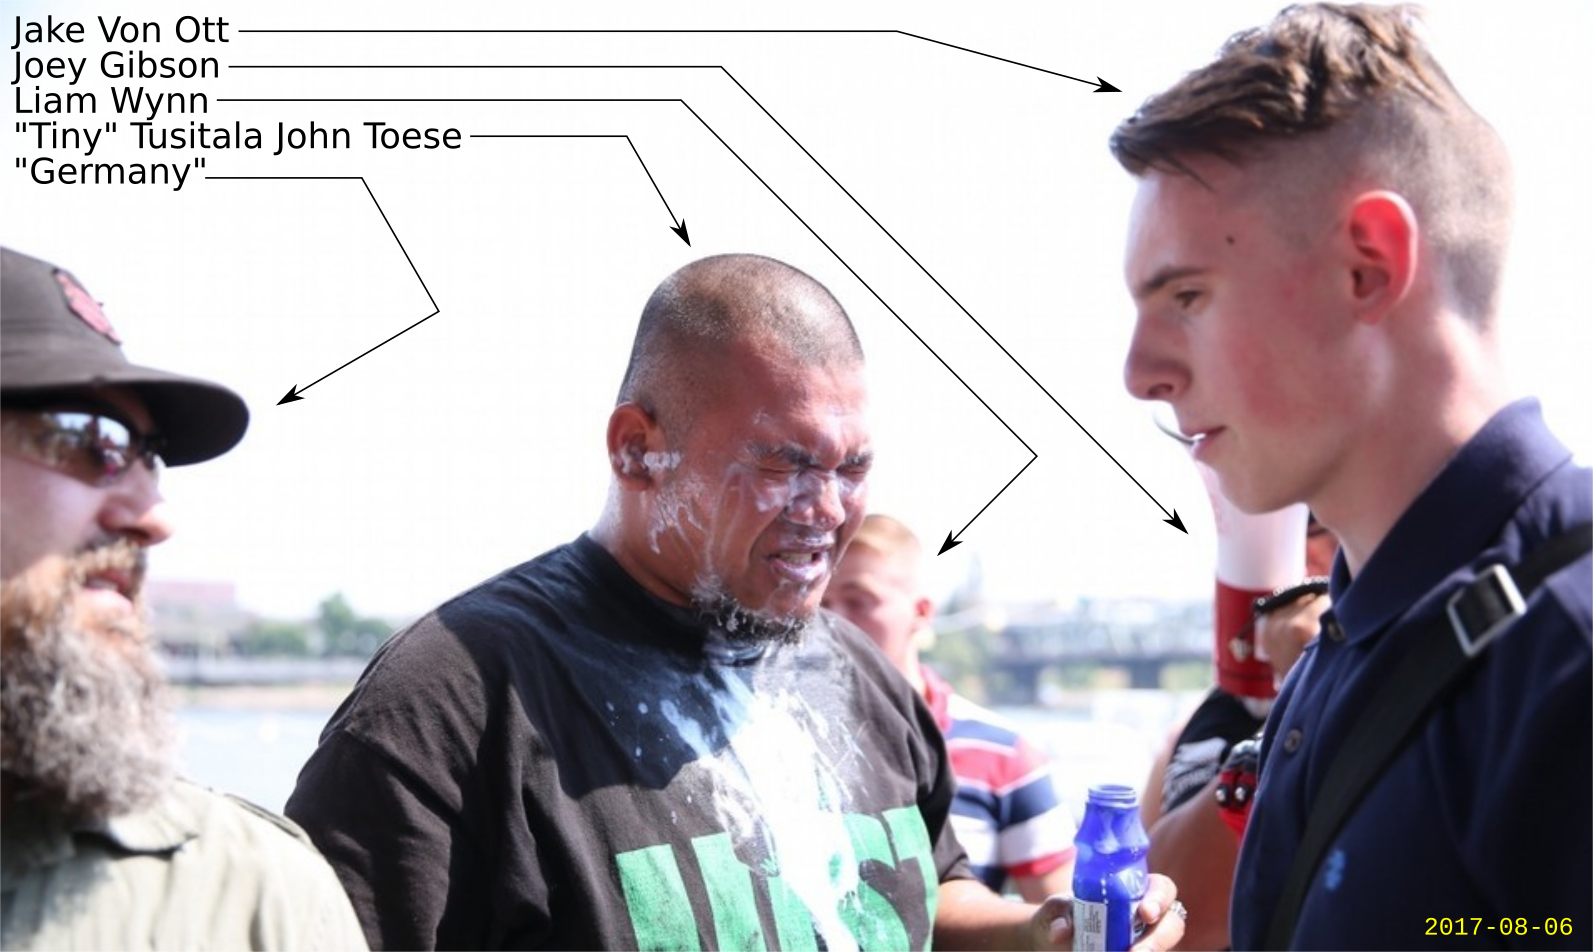 Jake Von Ott hangs out with Patriot Prayer and their Nazi friends